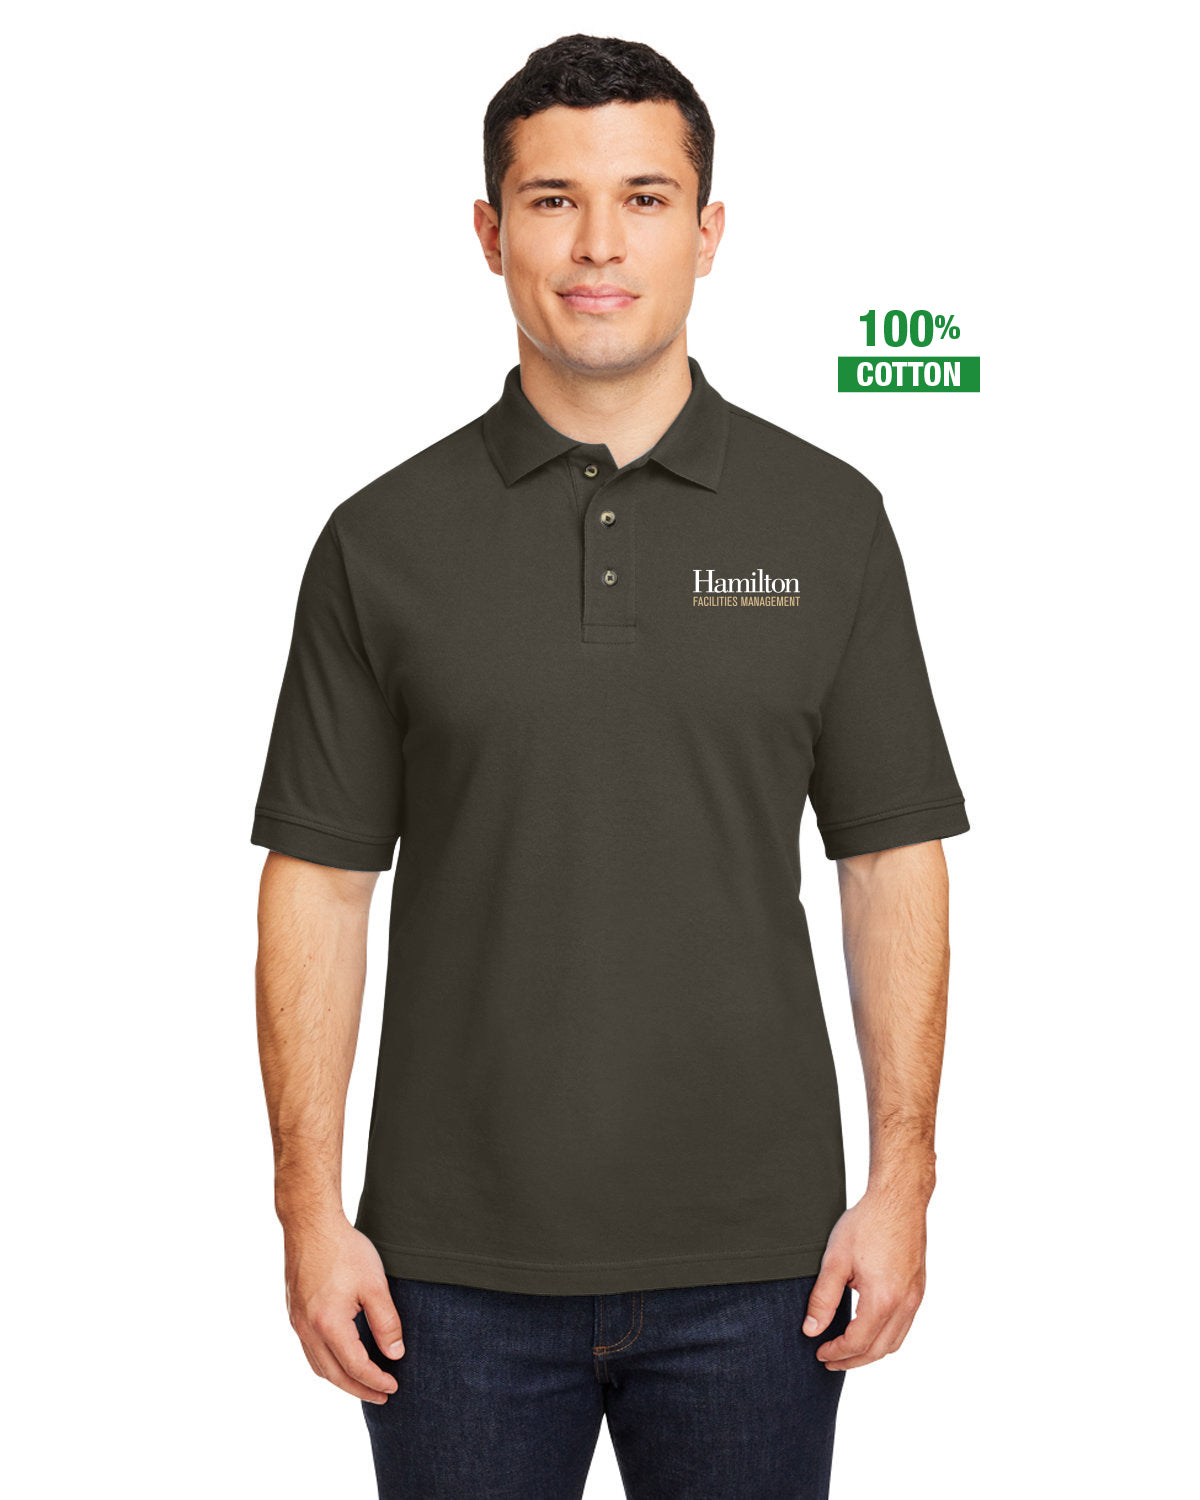 Adult Short Sleeved Cotton Polo - Black